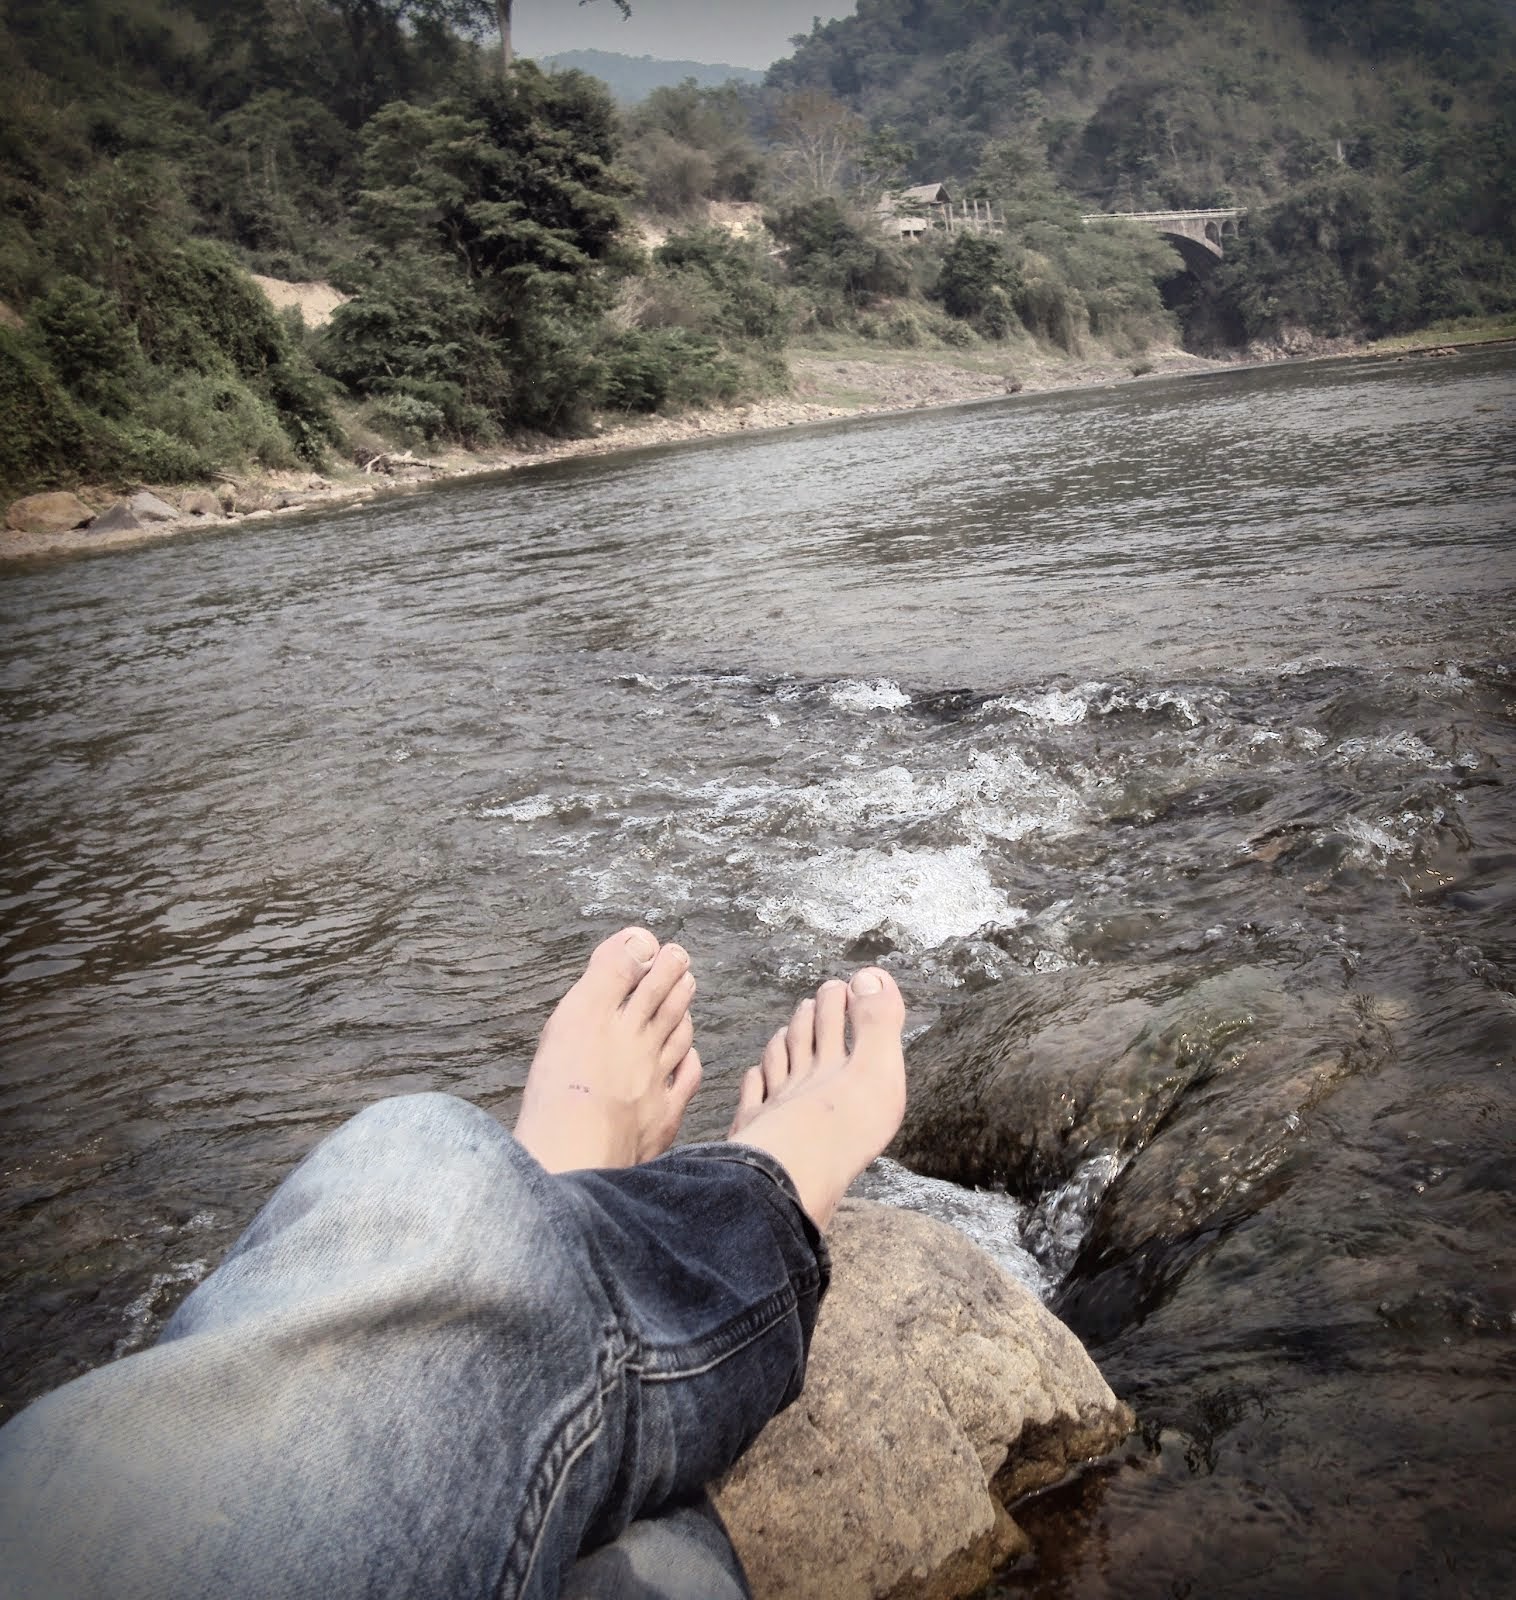 Lying on the river